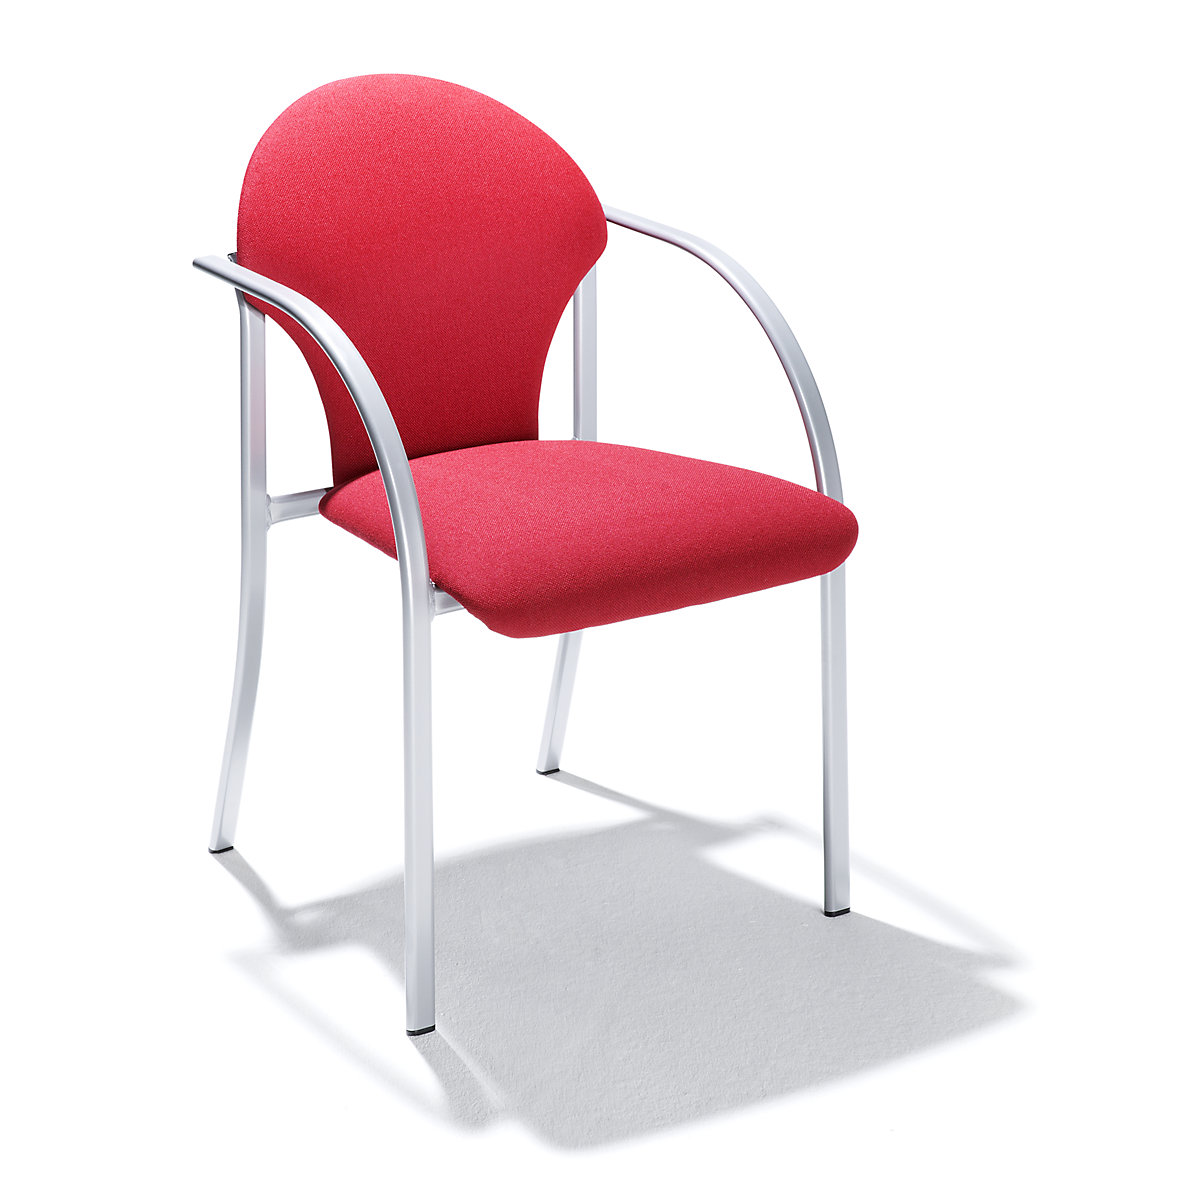 Padded stacking chair, seat HxWxD 470 x 450 x 490 mm, upholstery colour red, pack of 2-5